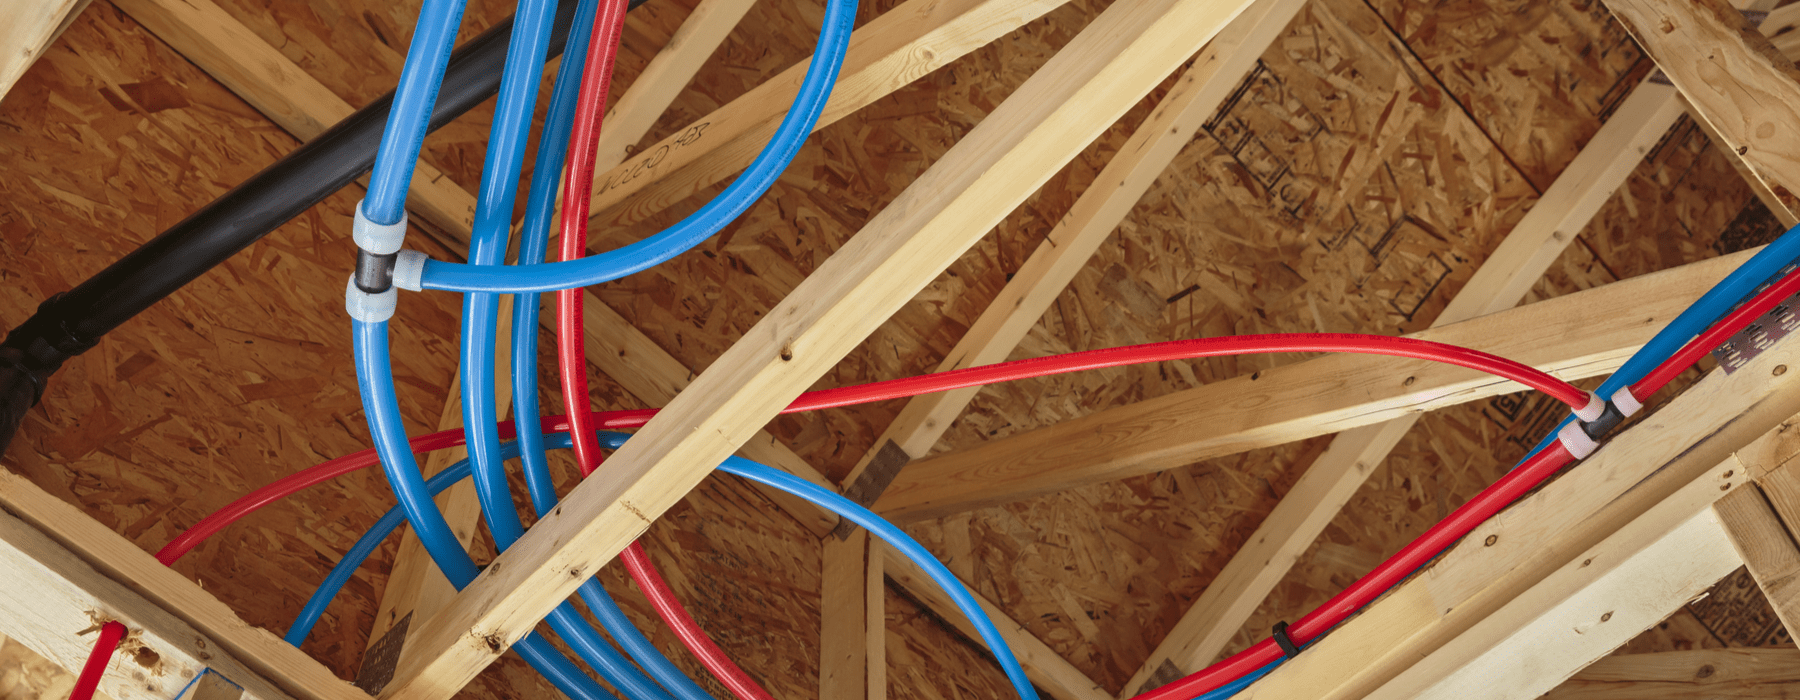 Advantages of PEX Piping in Building Installations